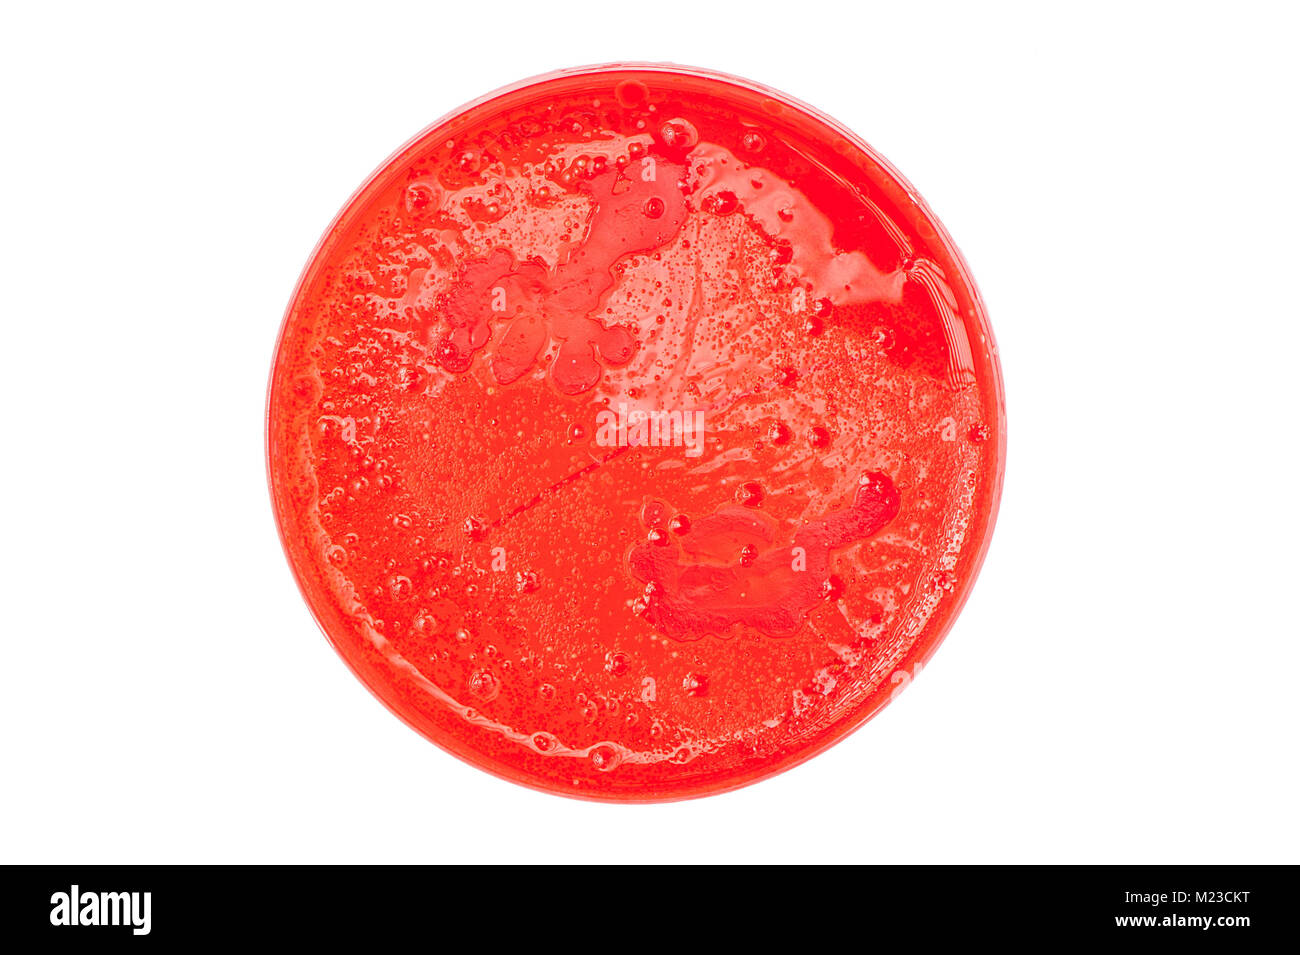 Petri dish with red medium, bacteria and yeast colonies growing, isolated on a white background. Stock Photo